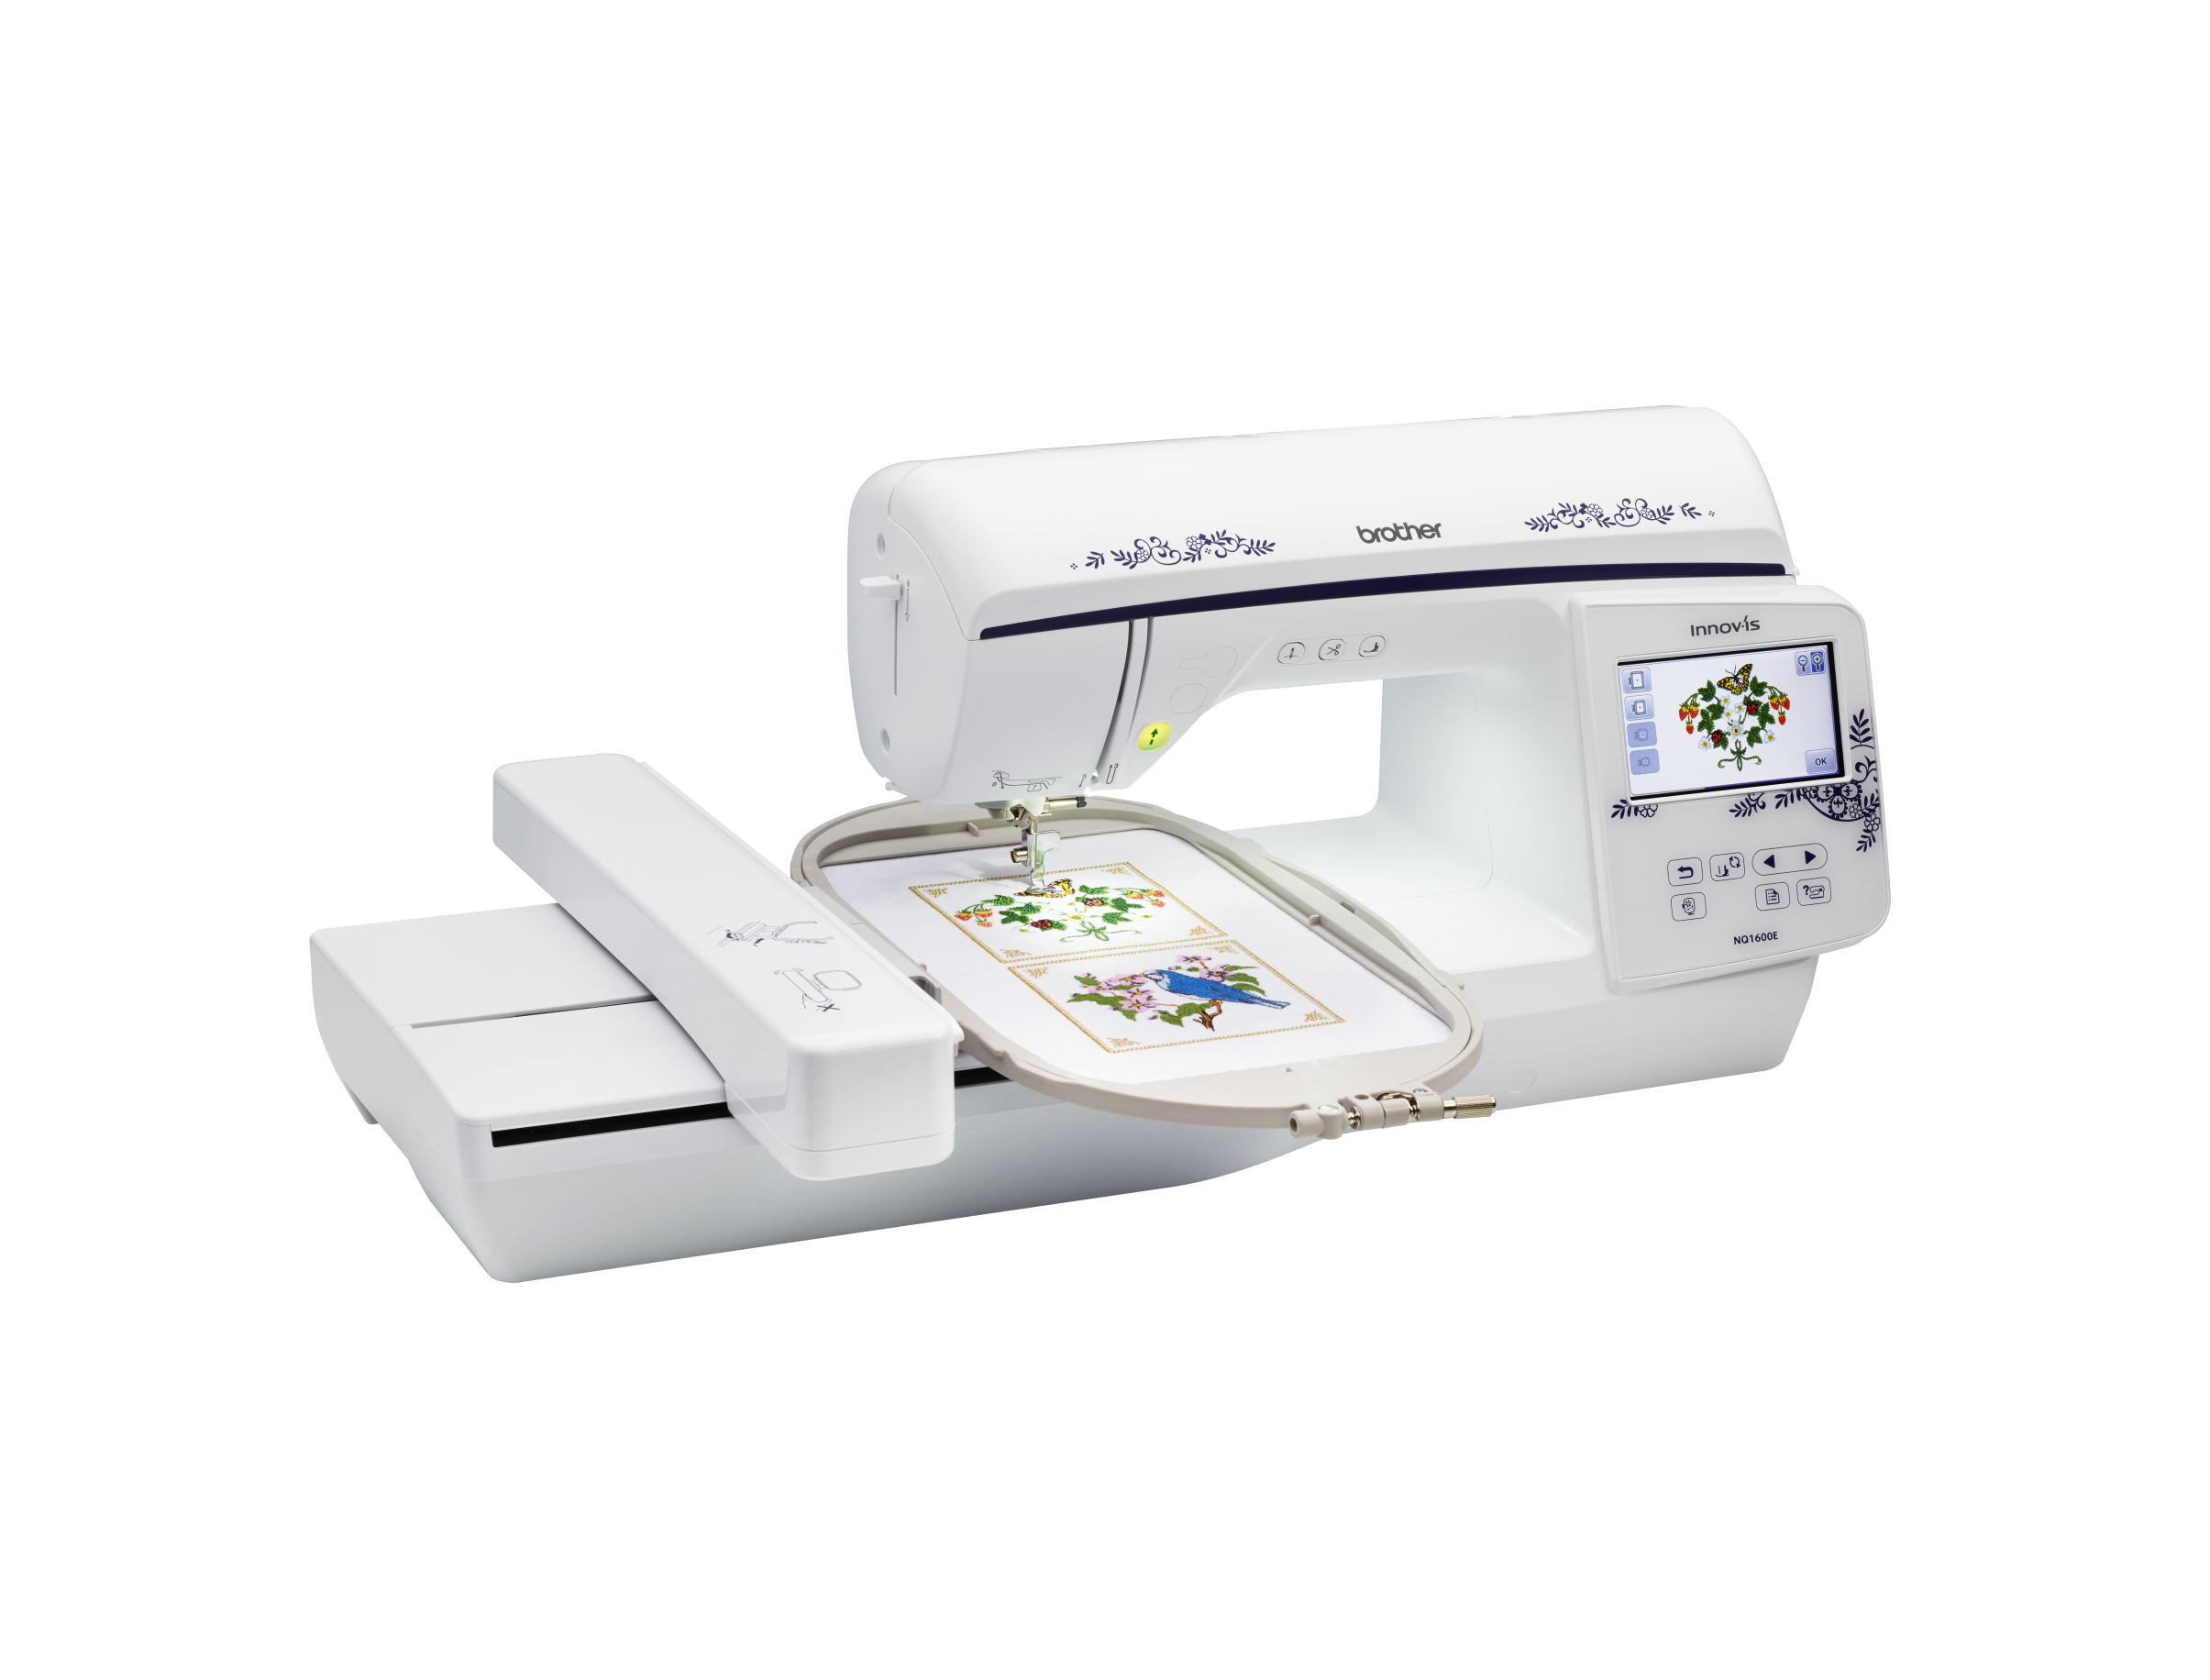 Brother Innov-is NQ1600E Embroidery Machine 10x6 for Sale at World Weidner